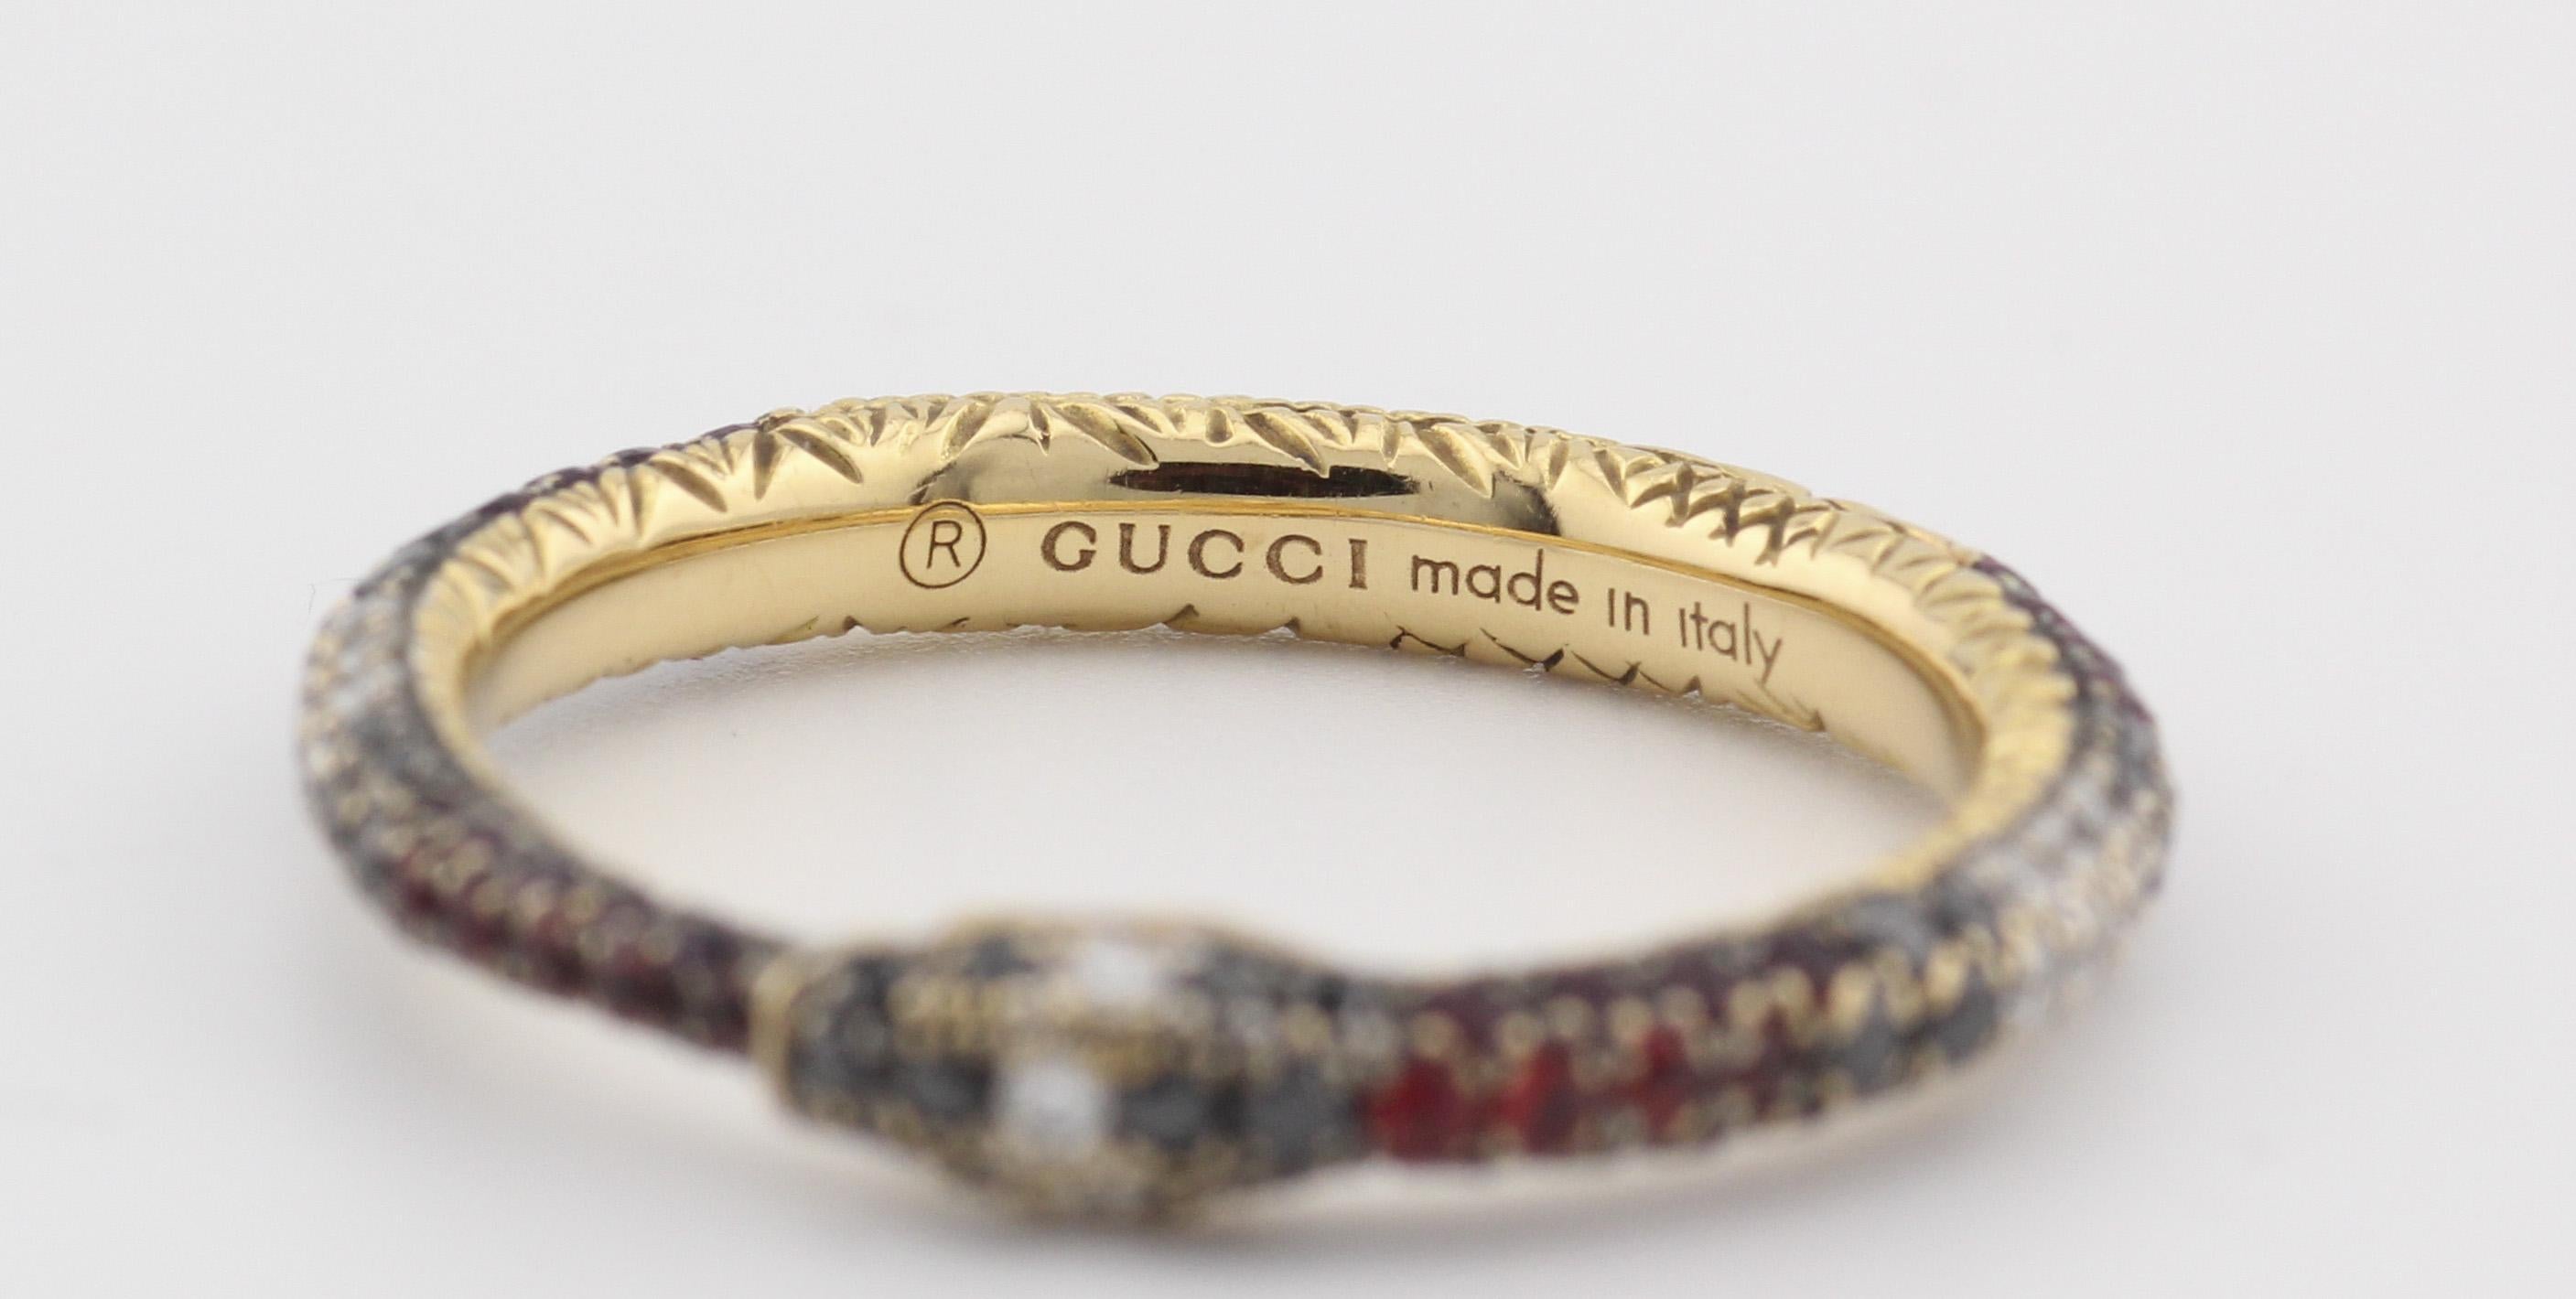 Gucci Ouroboros Gemstone 18K Yellow Gold Kingsnake Band Ring Size 5 For Sale 2